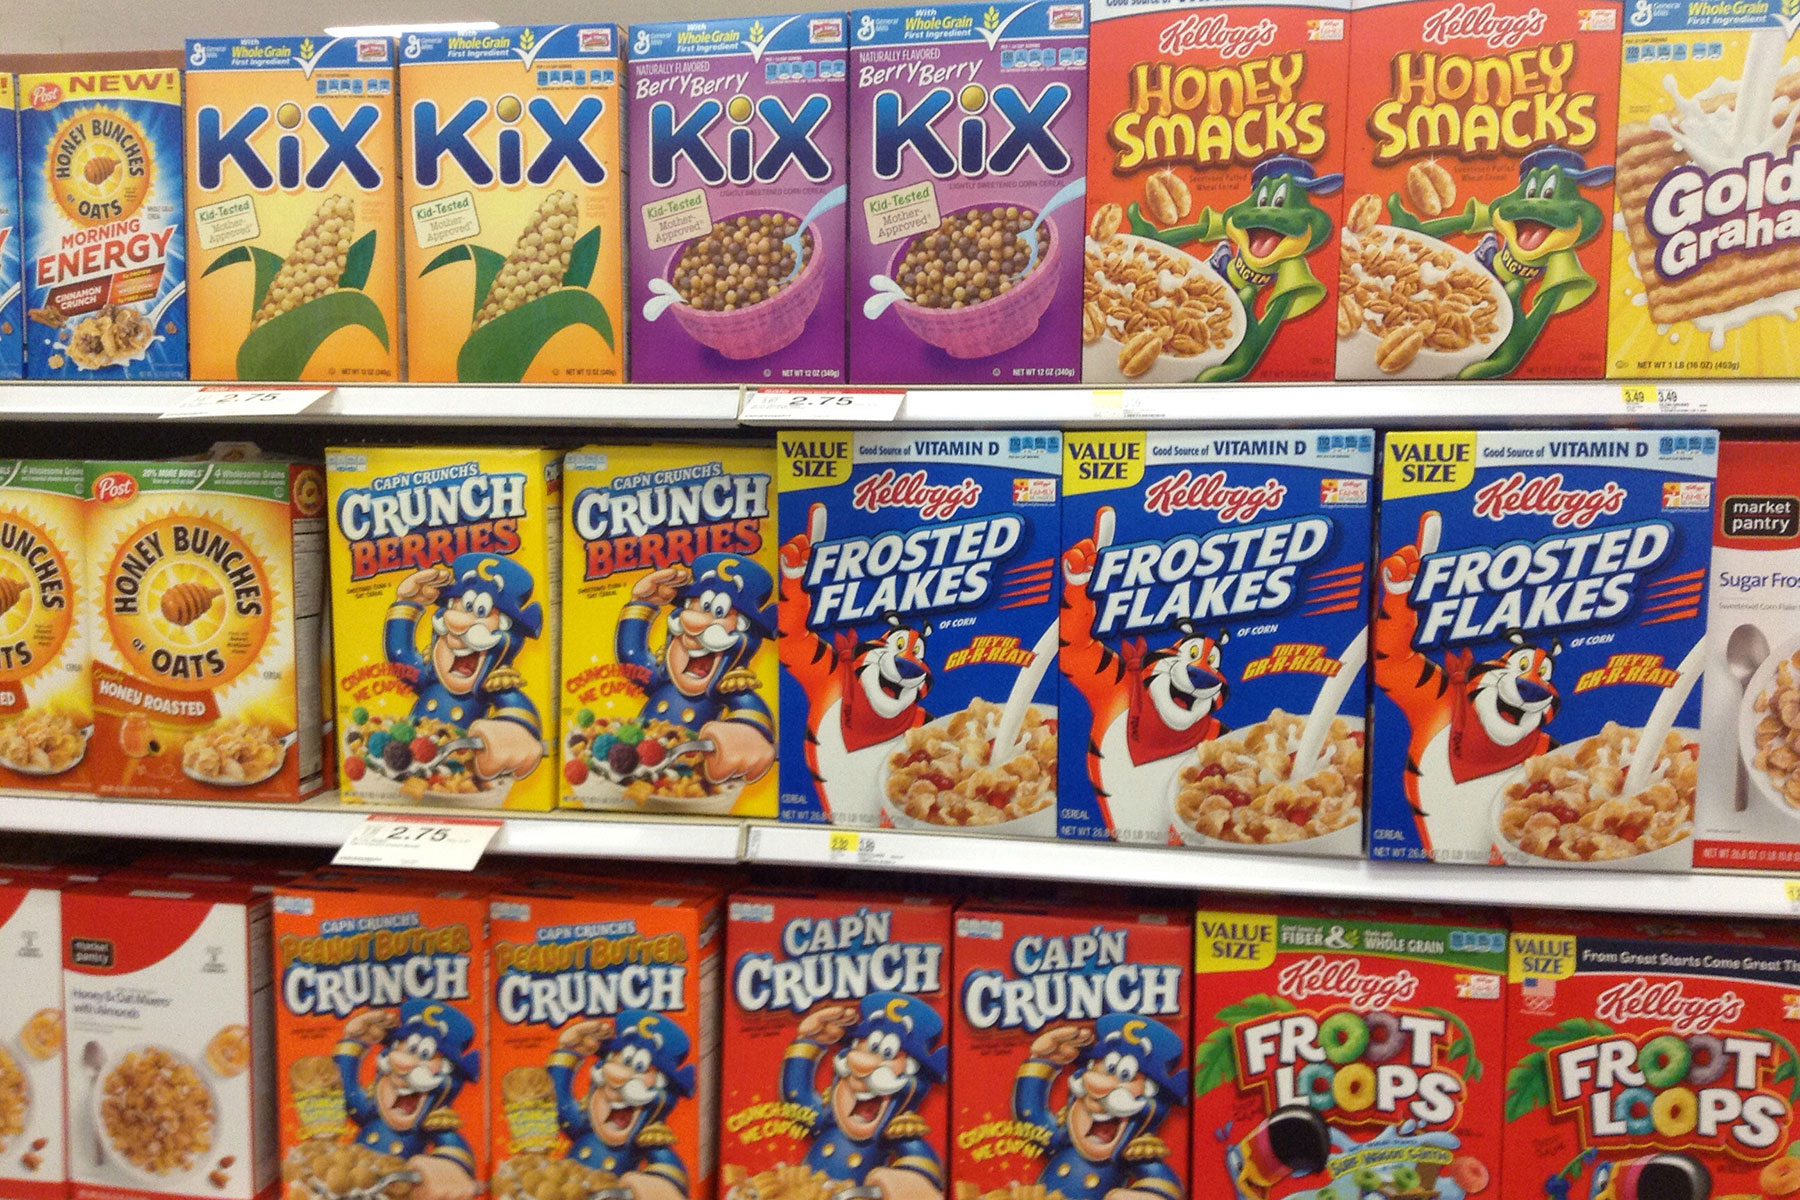 Poker Players Debate Hot Button Issue: What are your Favorite Cereals?